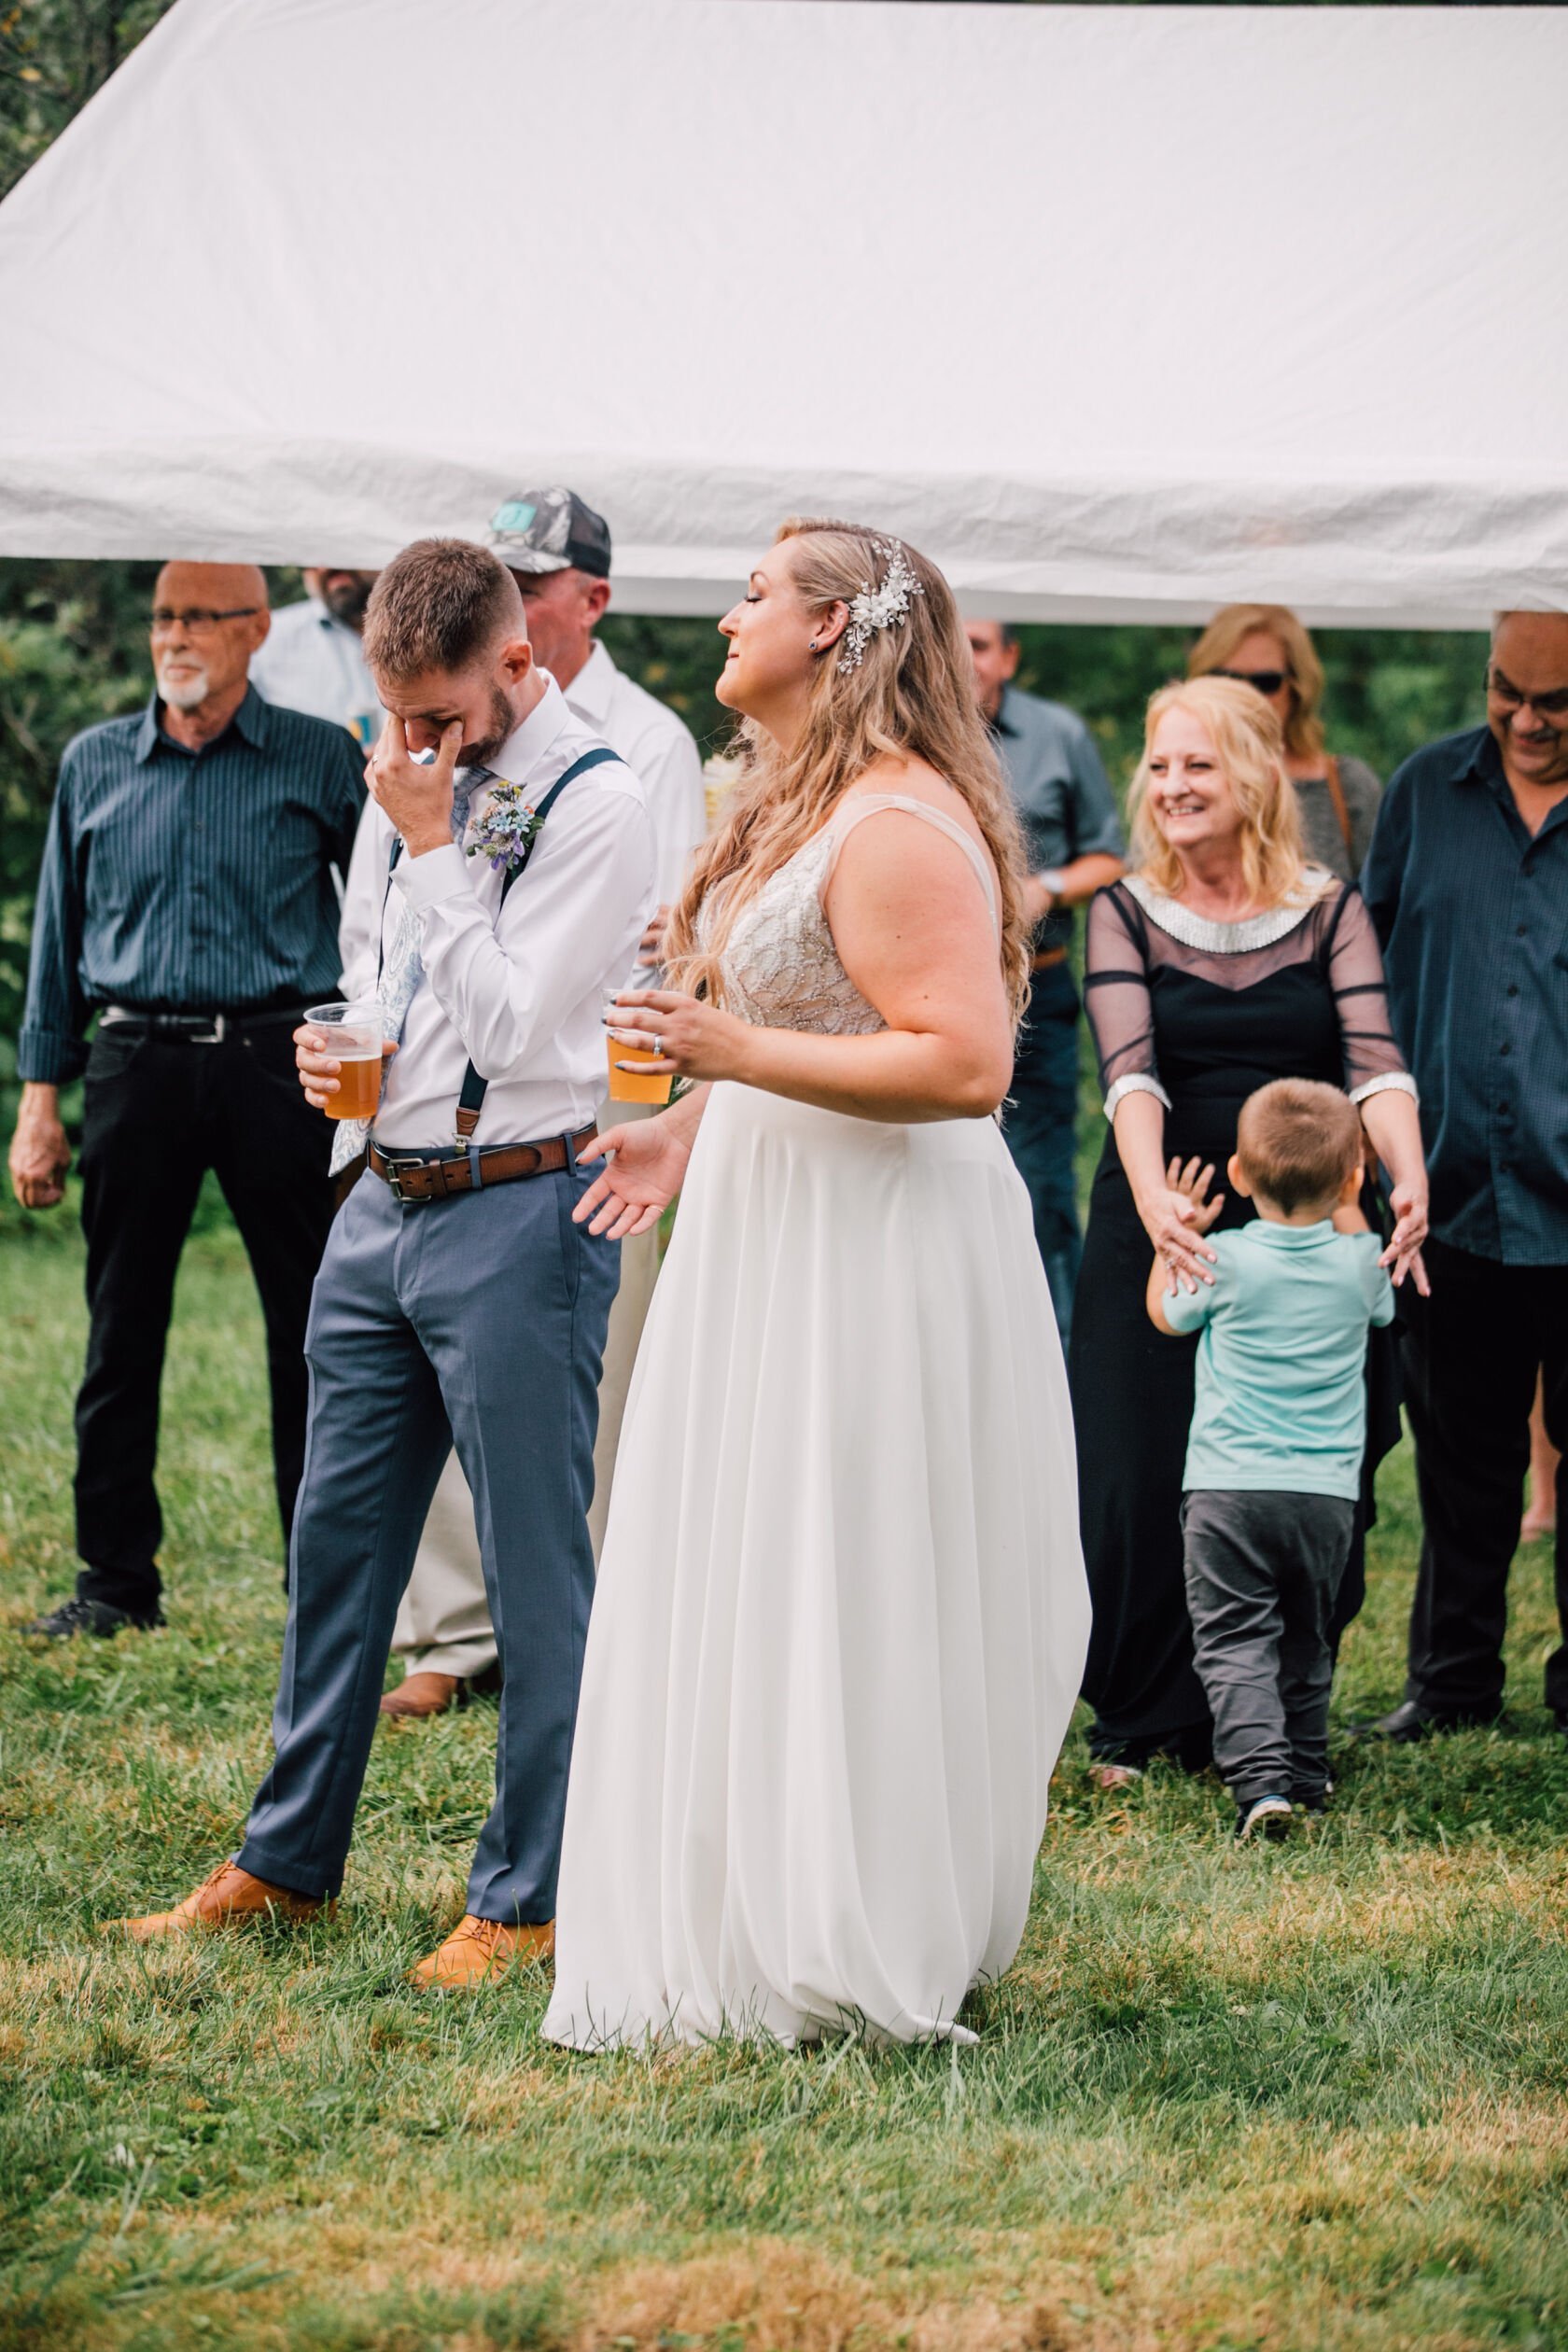  Groom tears up during toasts at a backyard wedding reception 